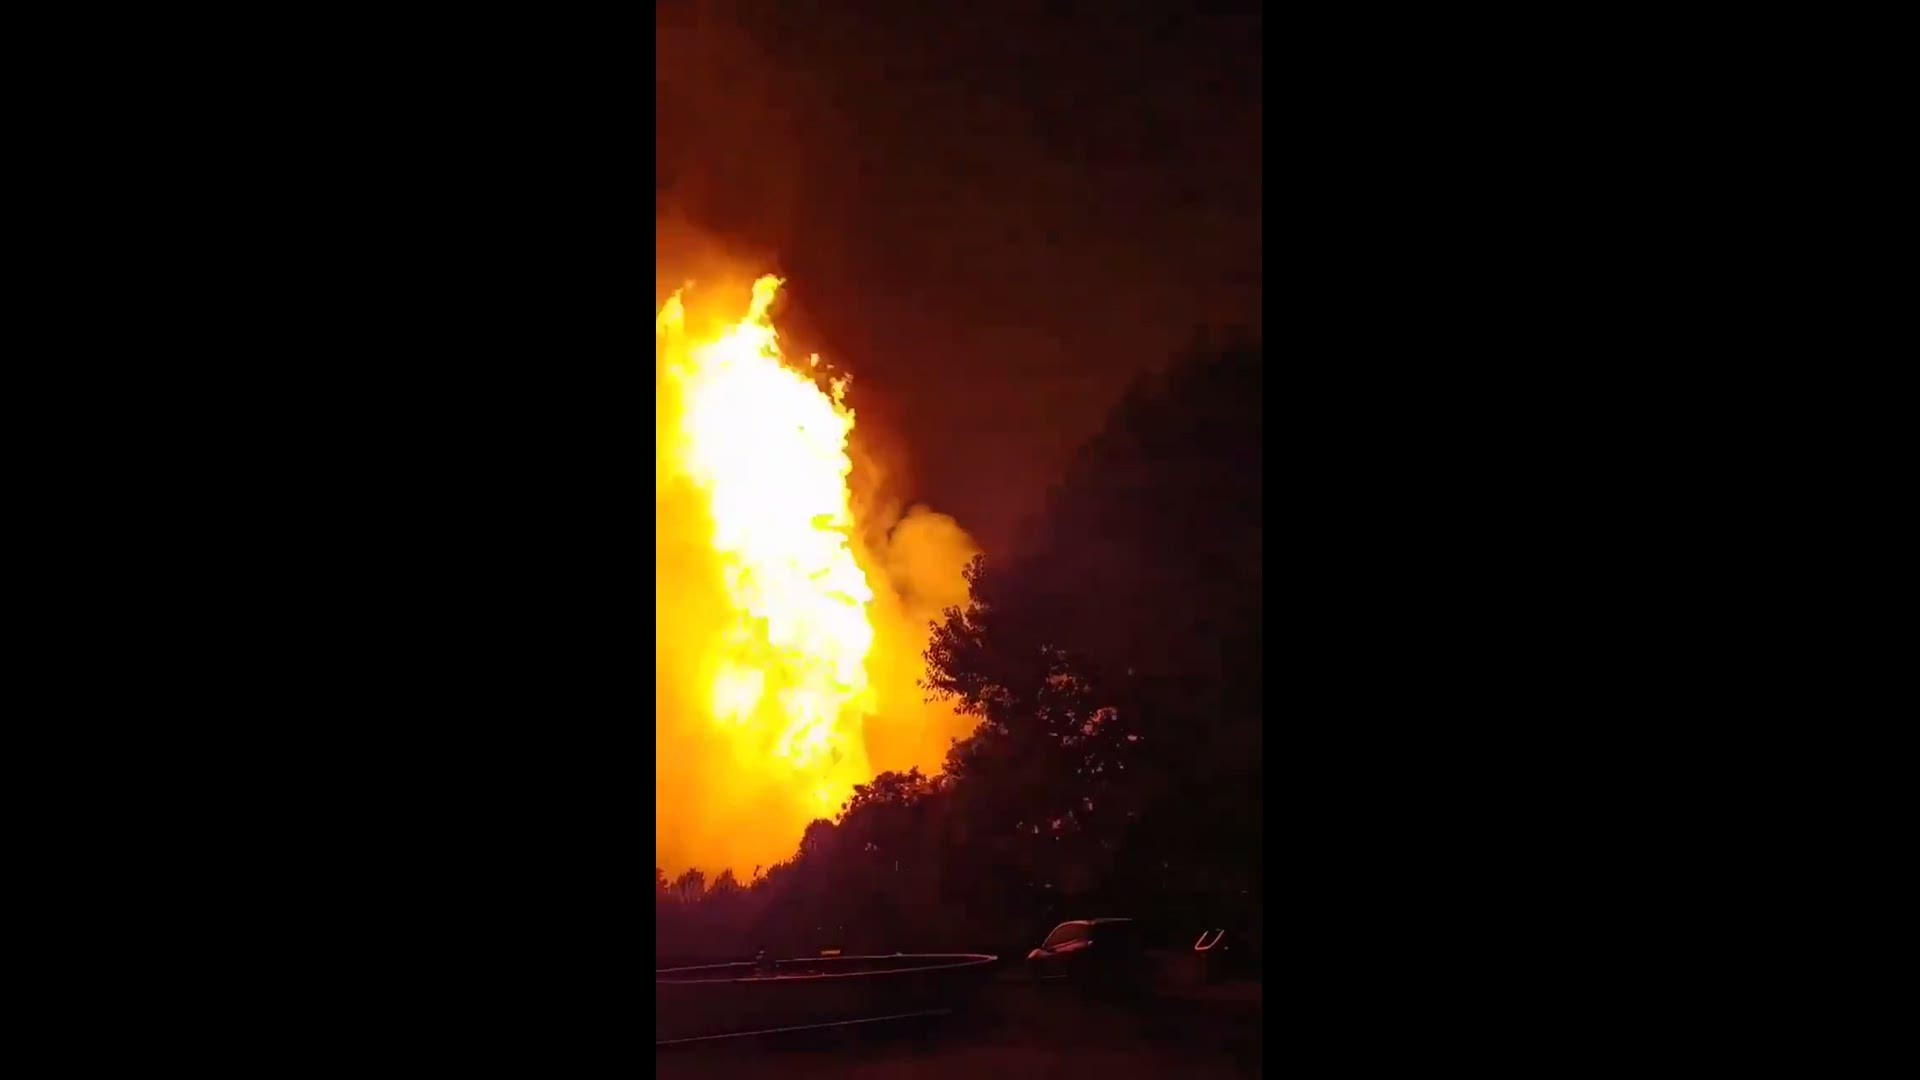 Levi Benedict shared this video of the fire after a deadly gas explosion in Kentucky on August 1.